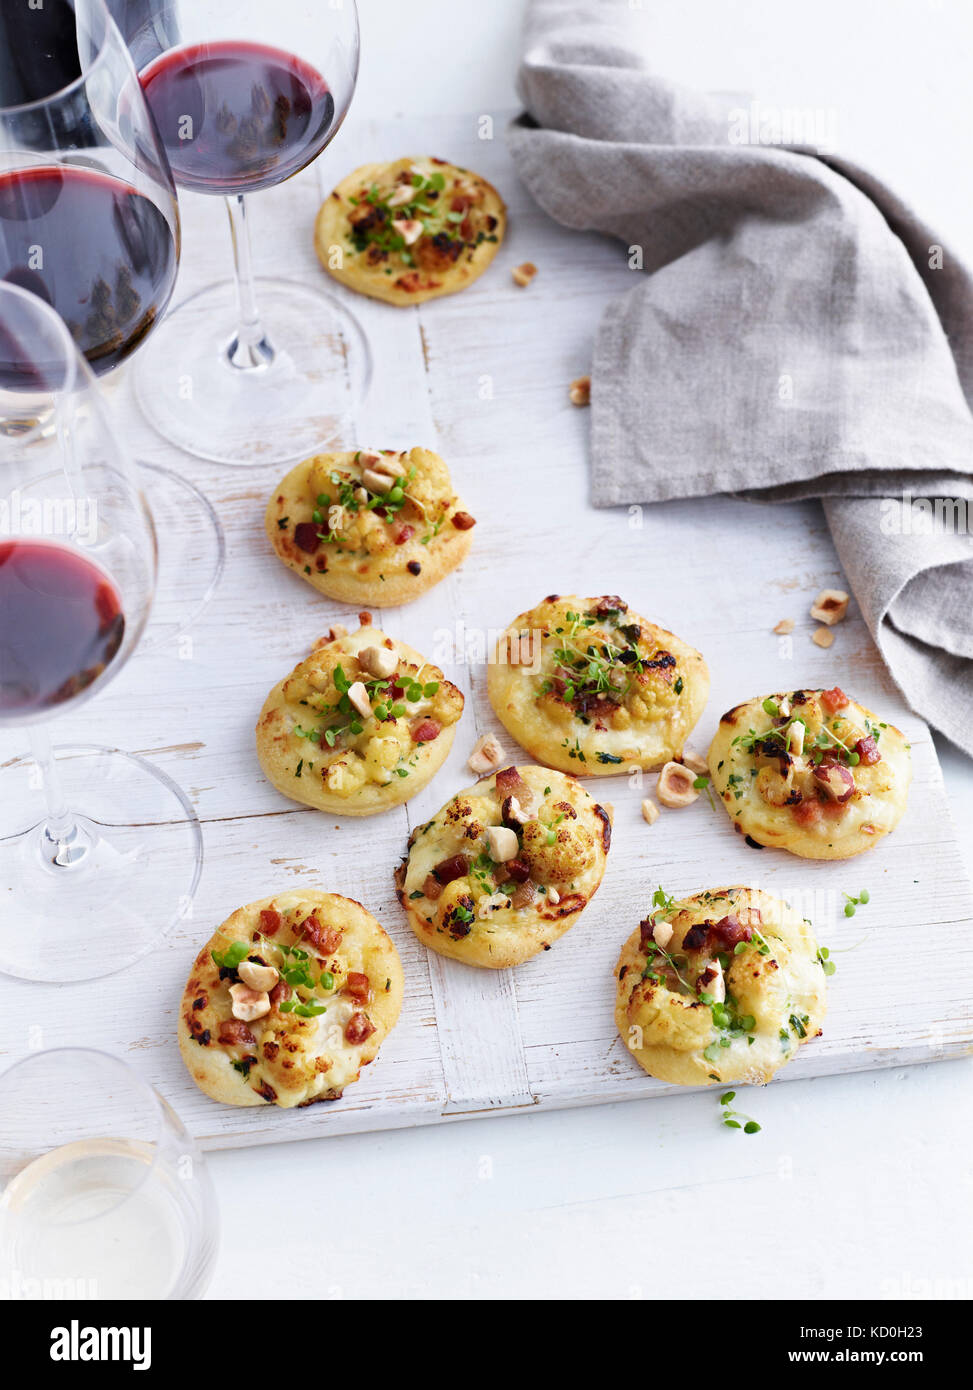 Mini pizzas topped with roasted cauliflower and gorgonzola, elevated view Stock Photo